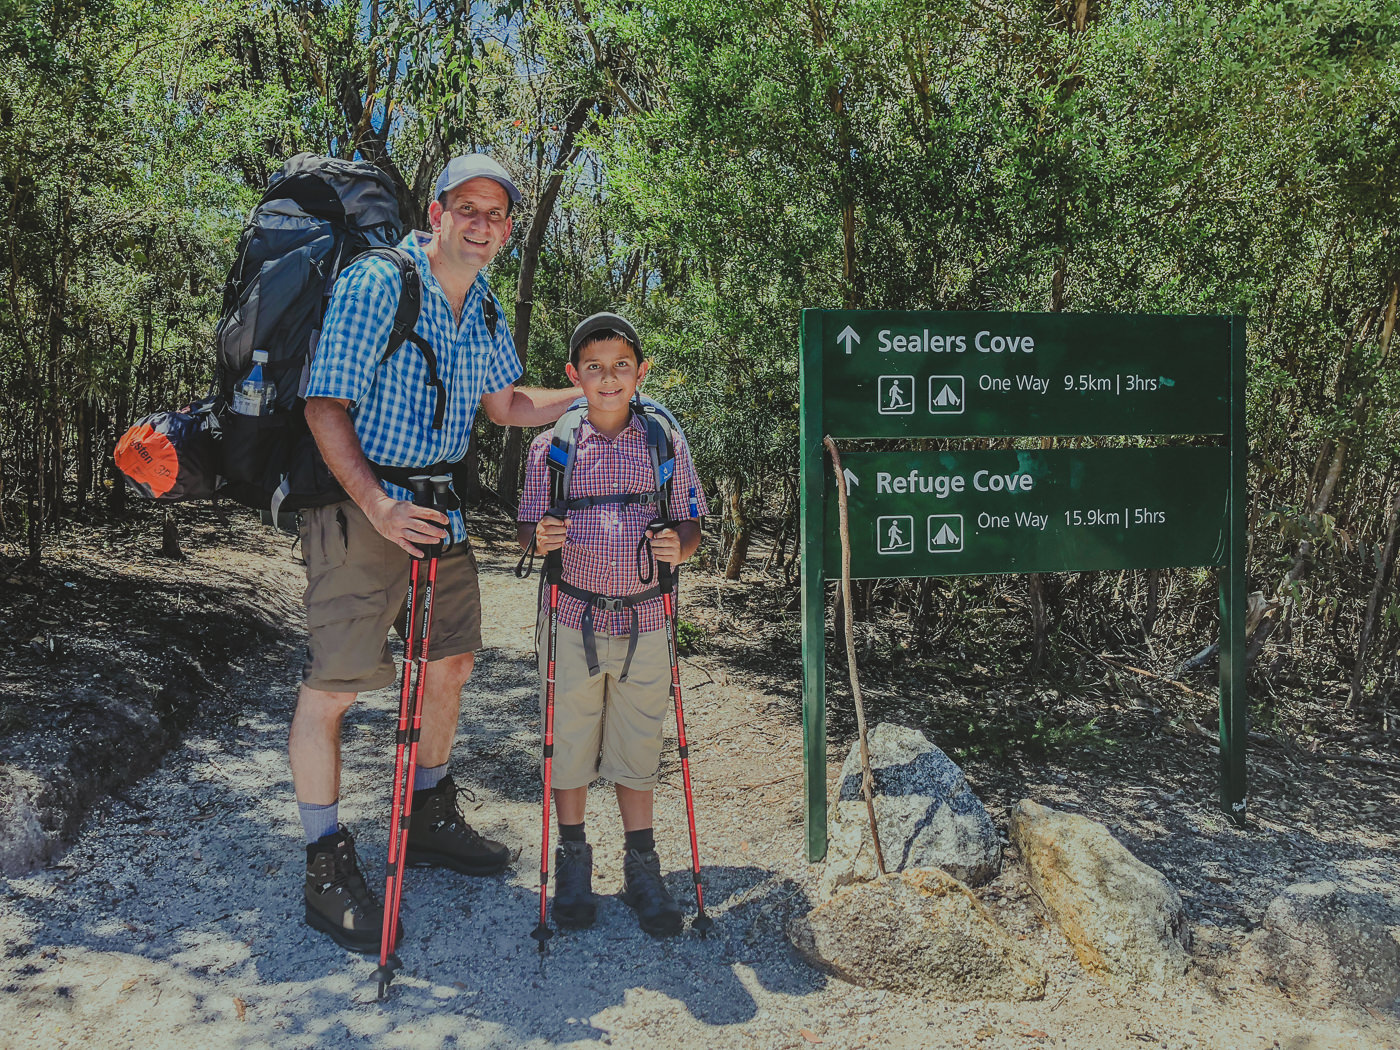 Start of the hike to Sealers Cove in Wilsons Prom National Park - Adventures near Melbourne